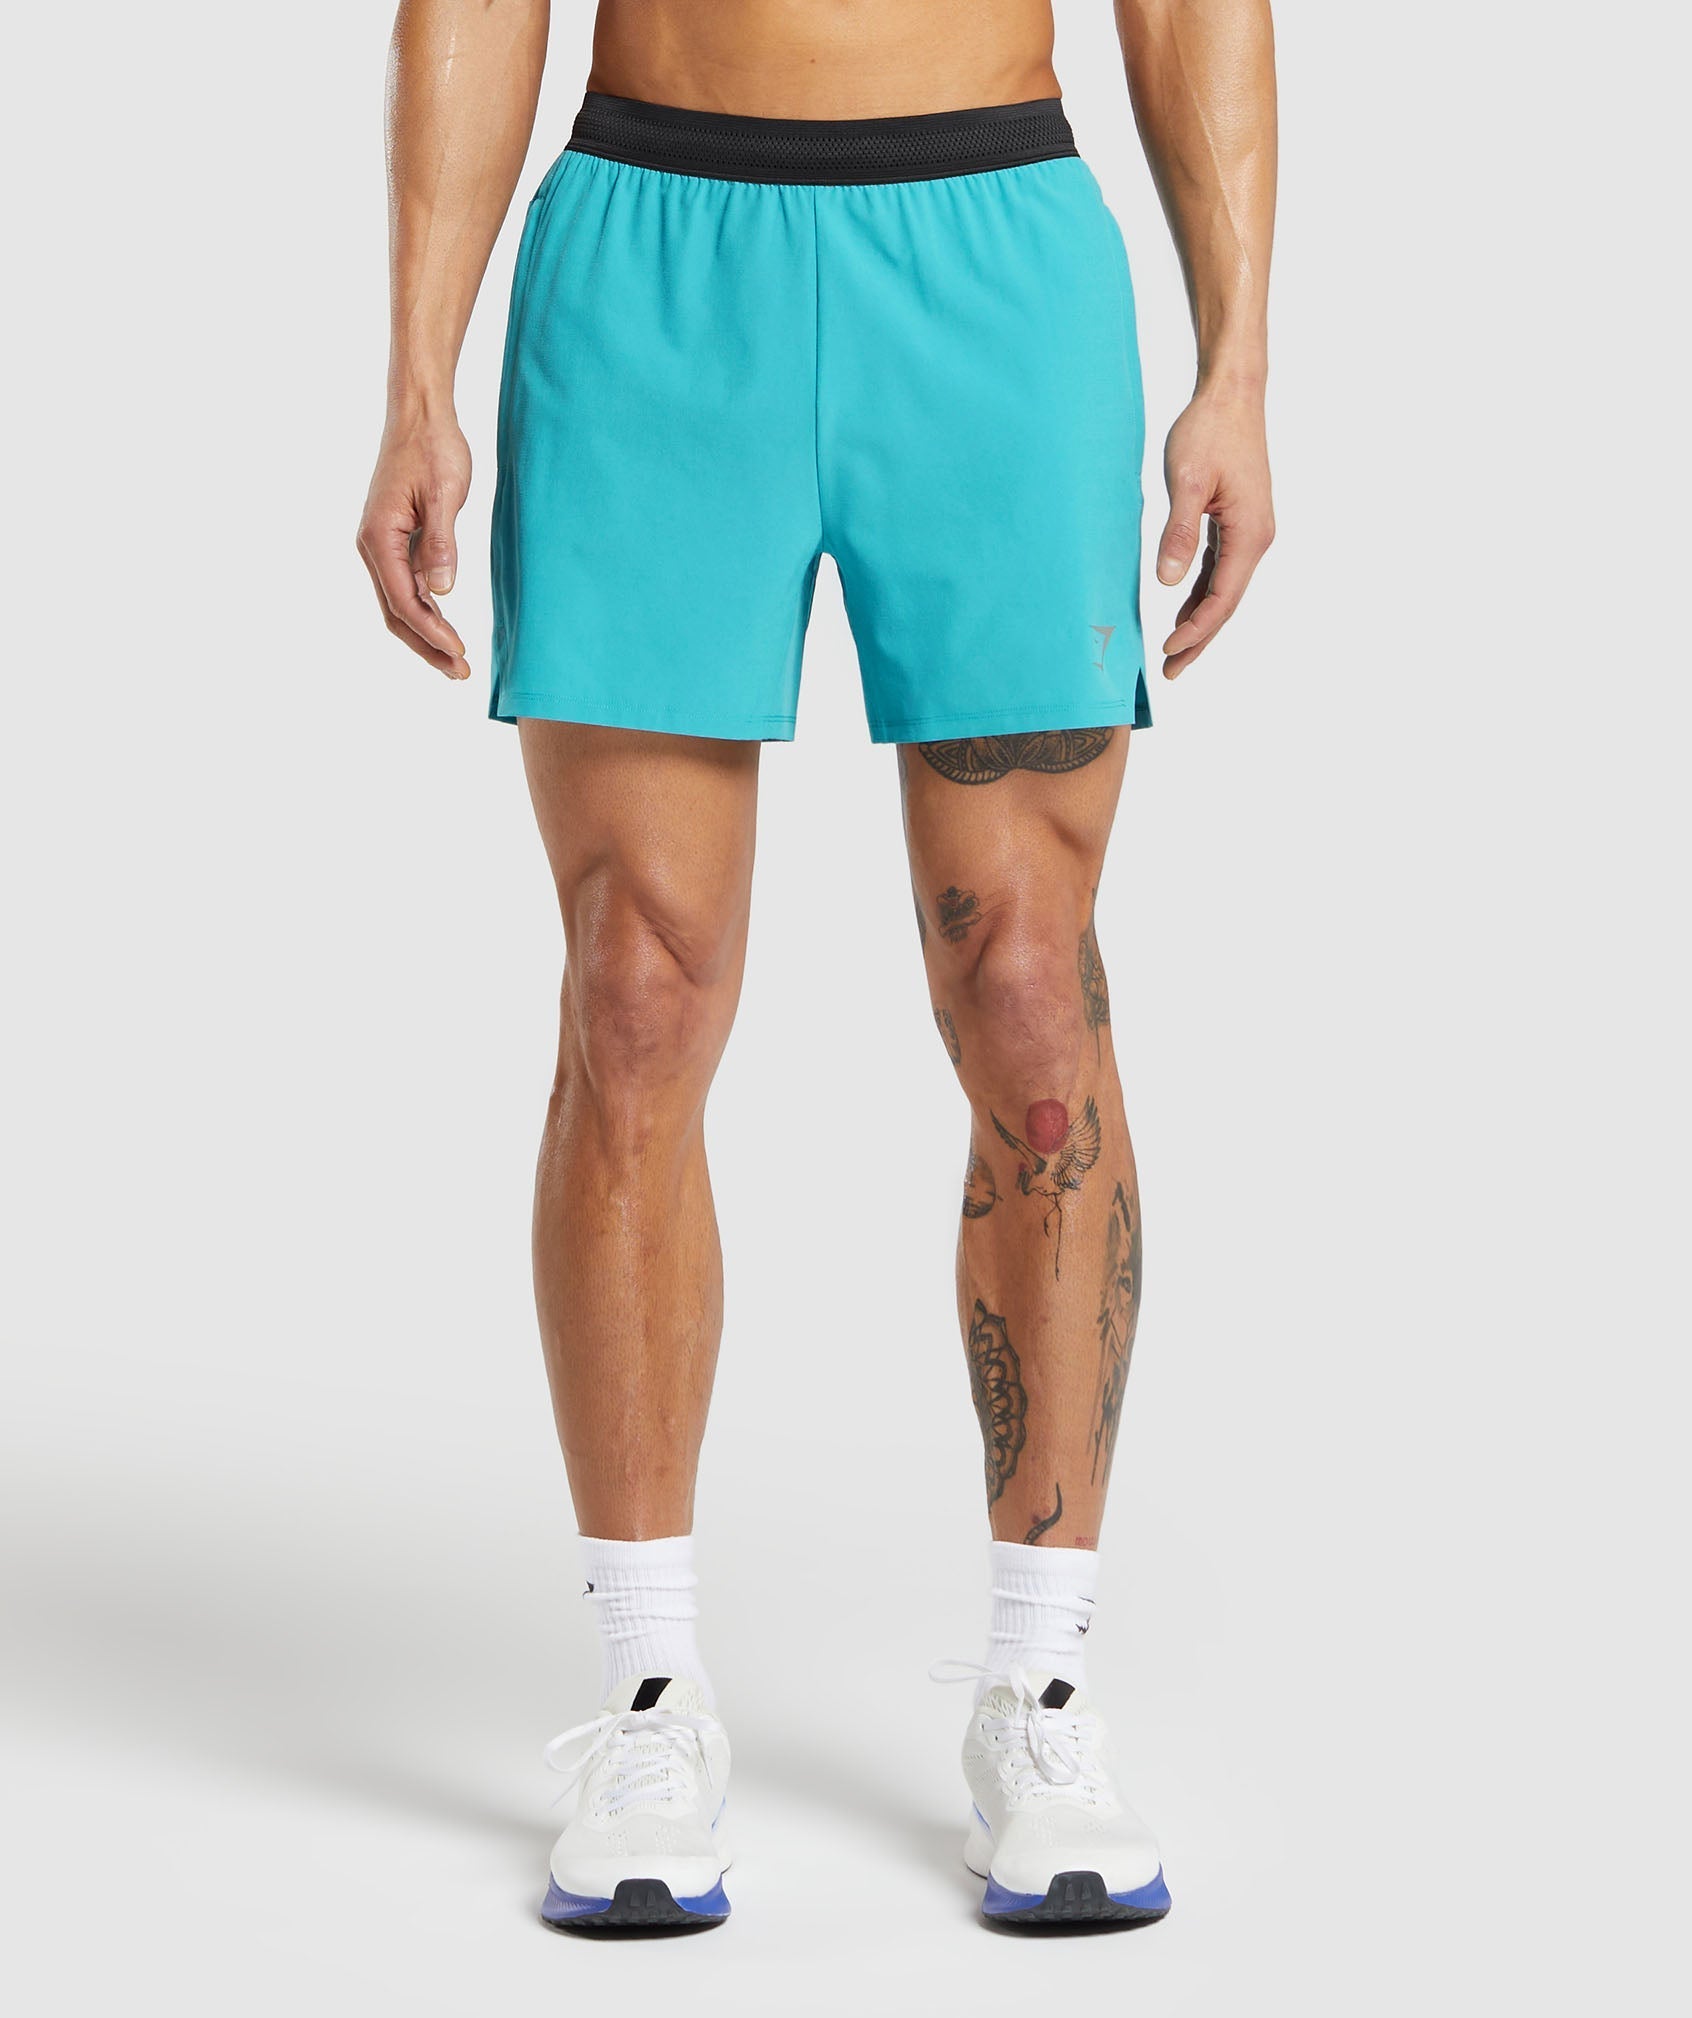 Speed 5" Shorts in Artificial Teal